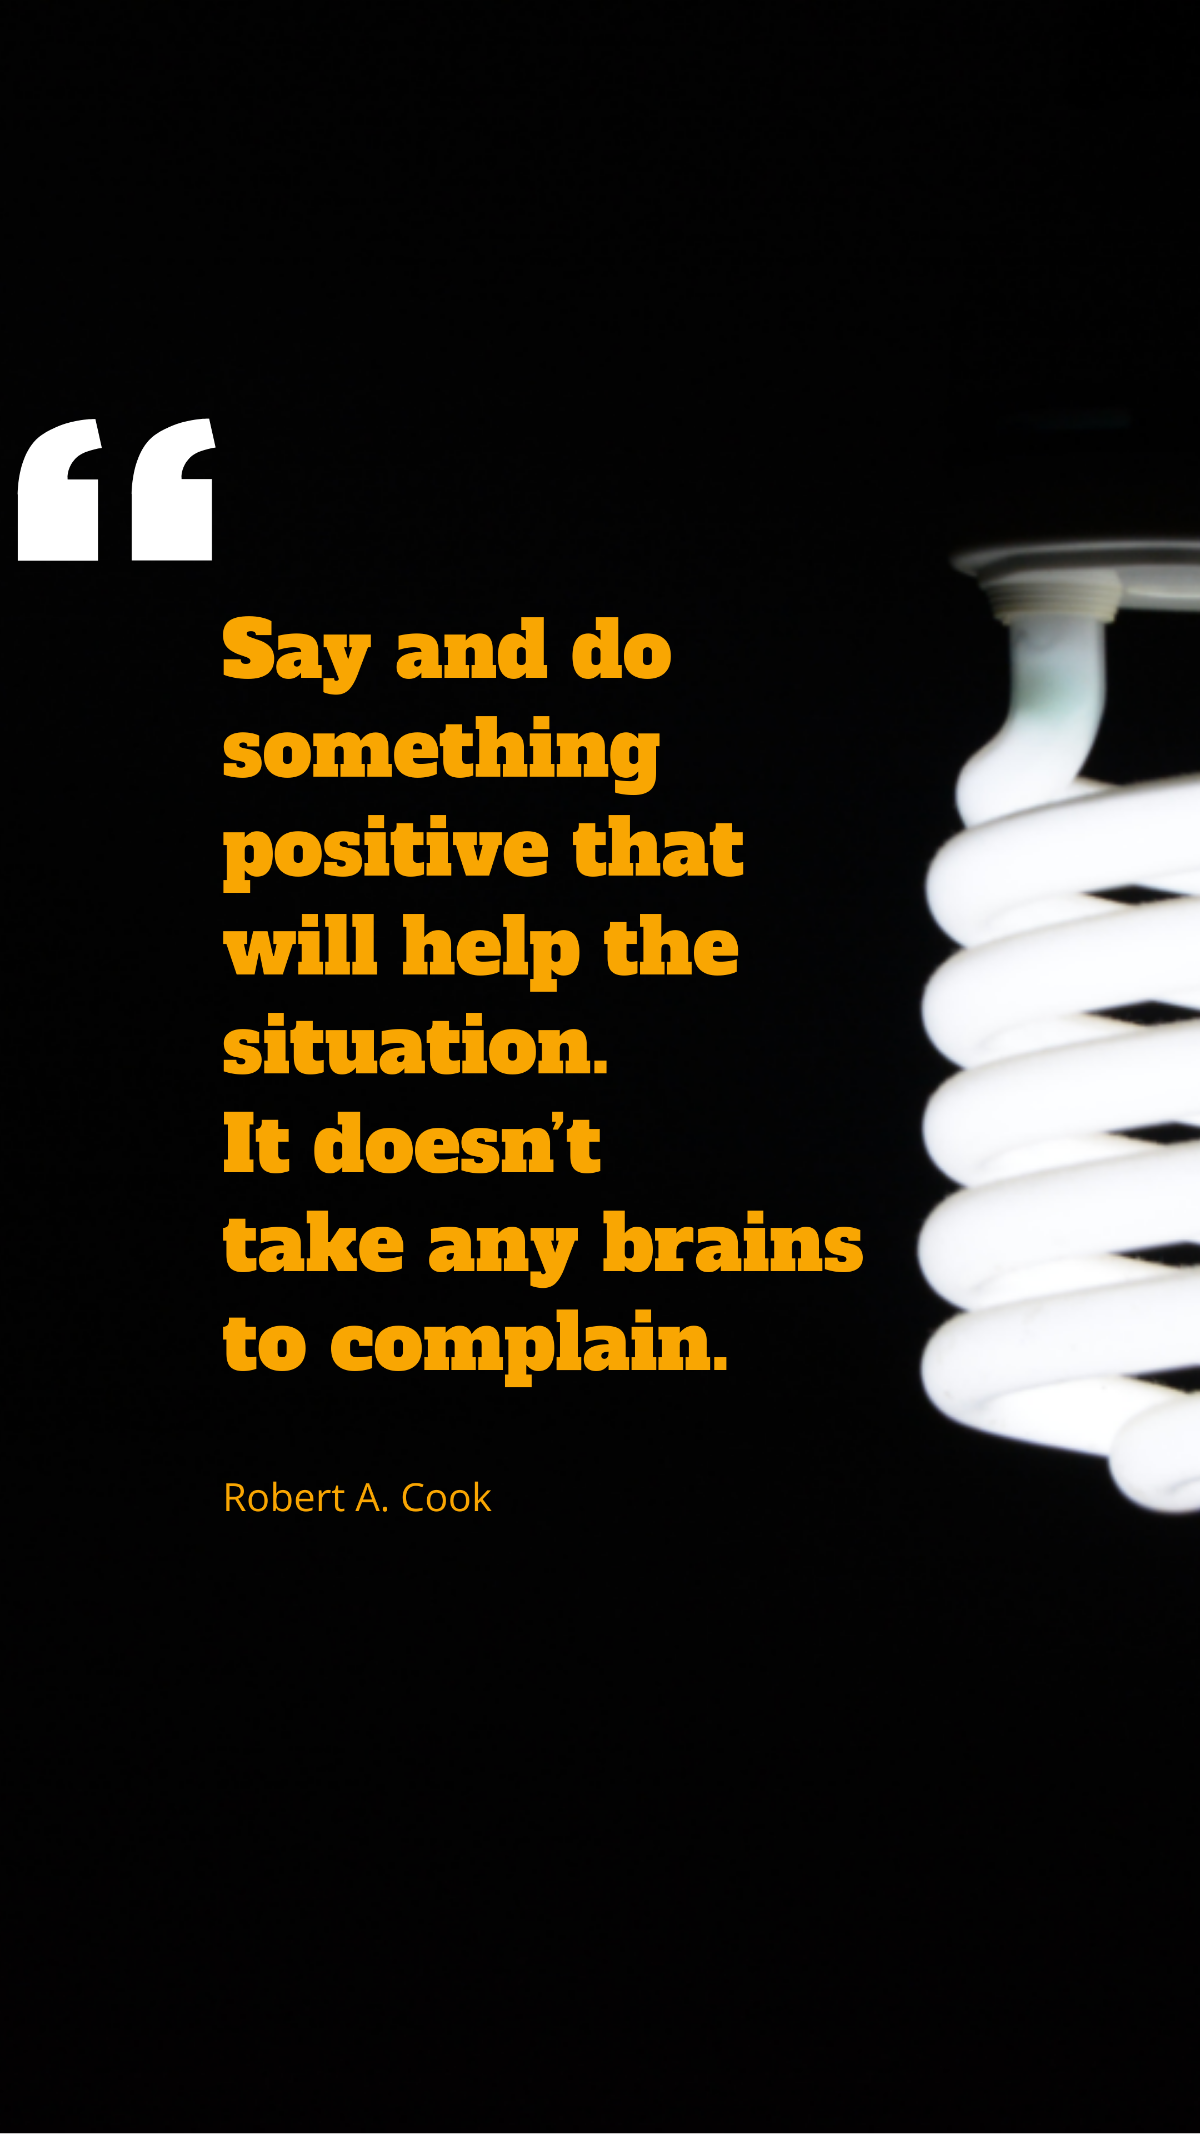 Robert A. Cook - Say and do something positive that will help the situation. It doesn’t take any brains to complain. Template